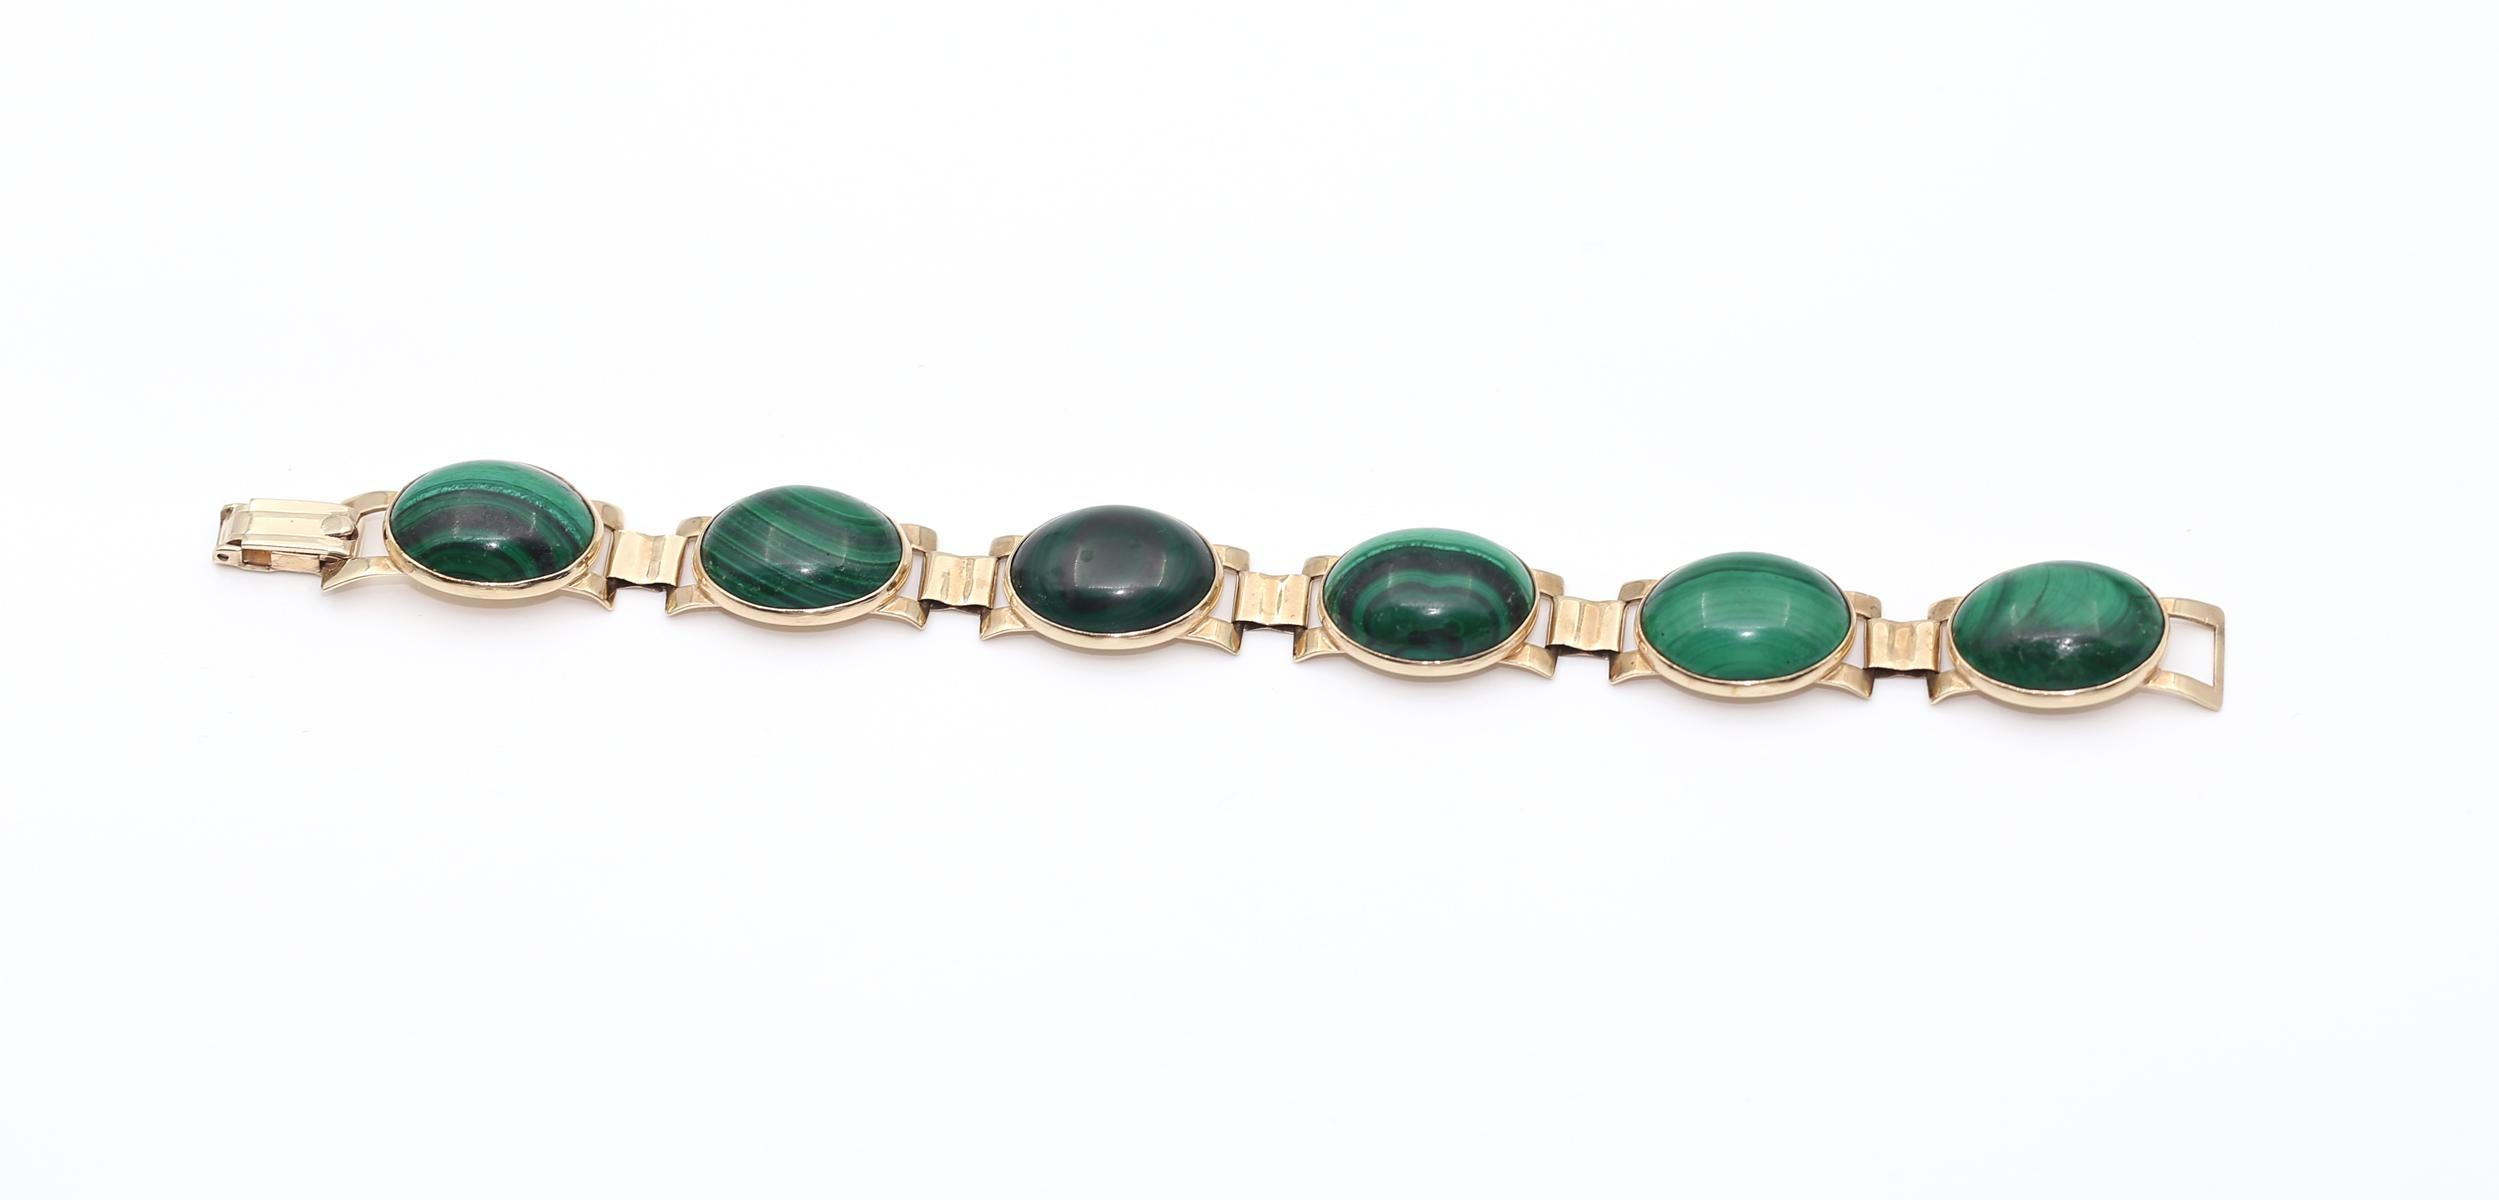 Yellow Gold and  Malachite Bracelet. Created around 1940 by the Norwegian jeweler Haglund, marked and stamped, 9 Karat Yellow Gold. Each link of the bracelet is not fixed to the other, so it is totally flexible and sits perfectly on the hand. The